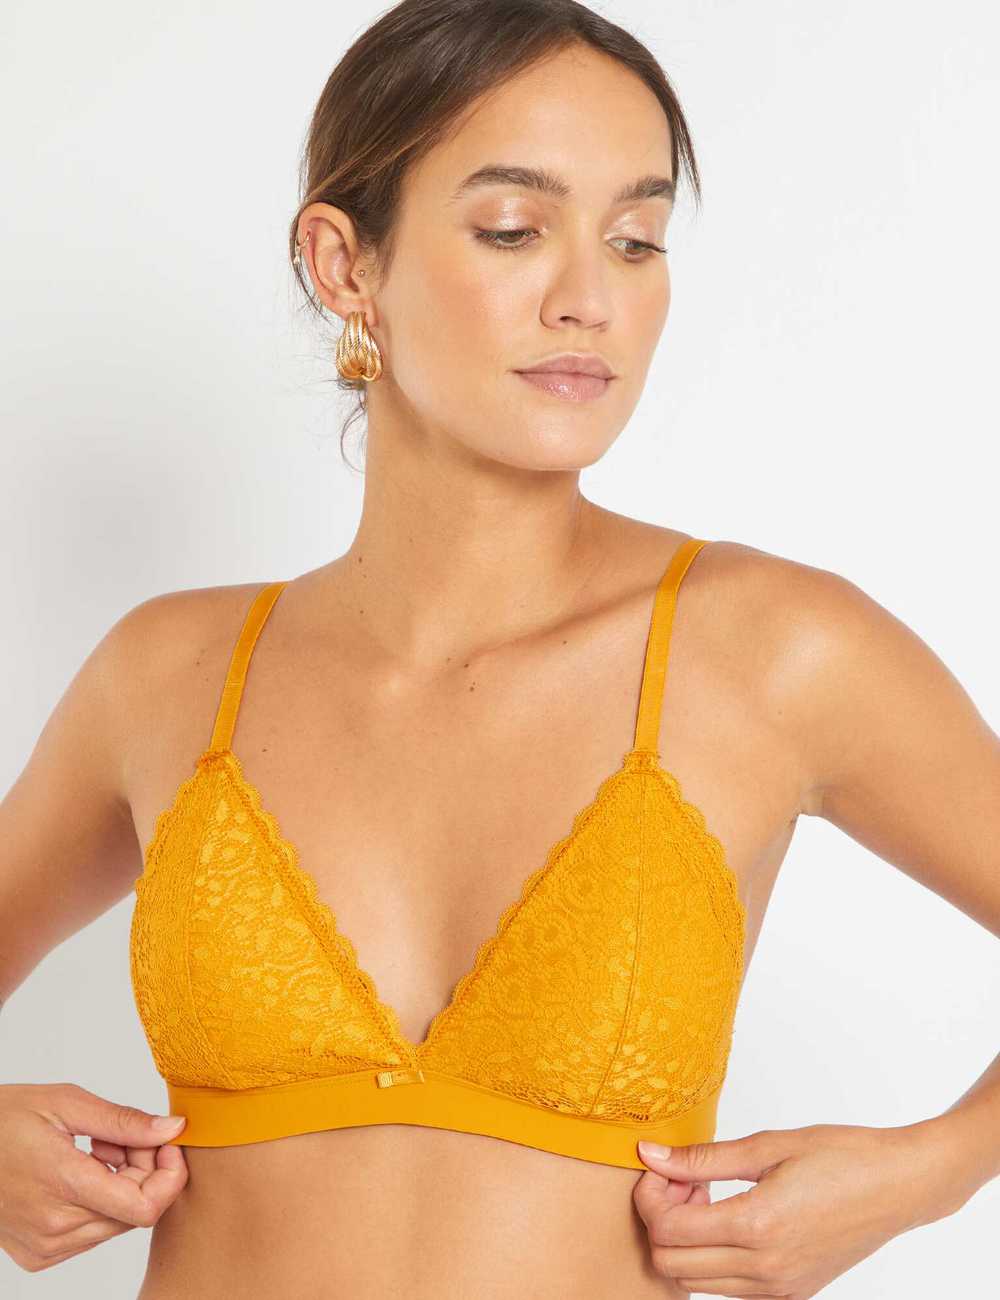 We Are We Wear lace triangle bralette in yellow - ShopStyle Bras